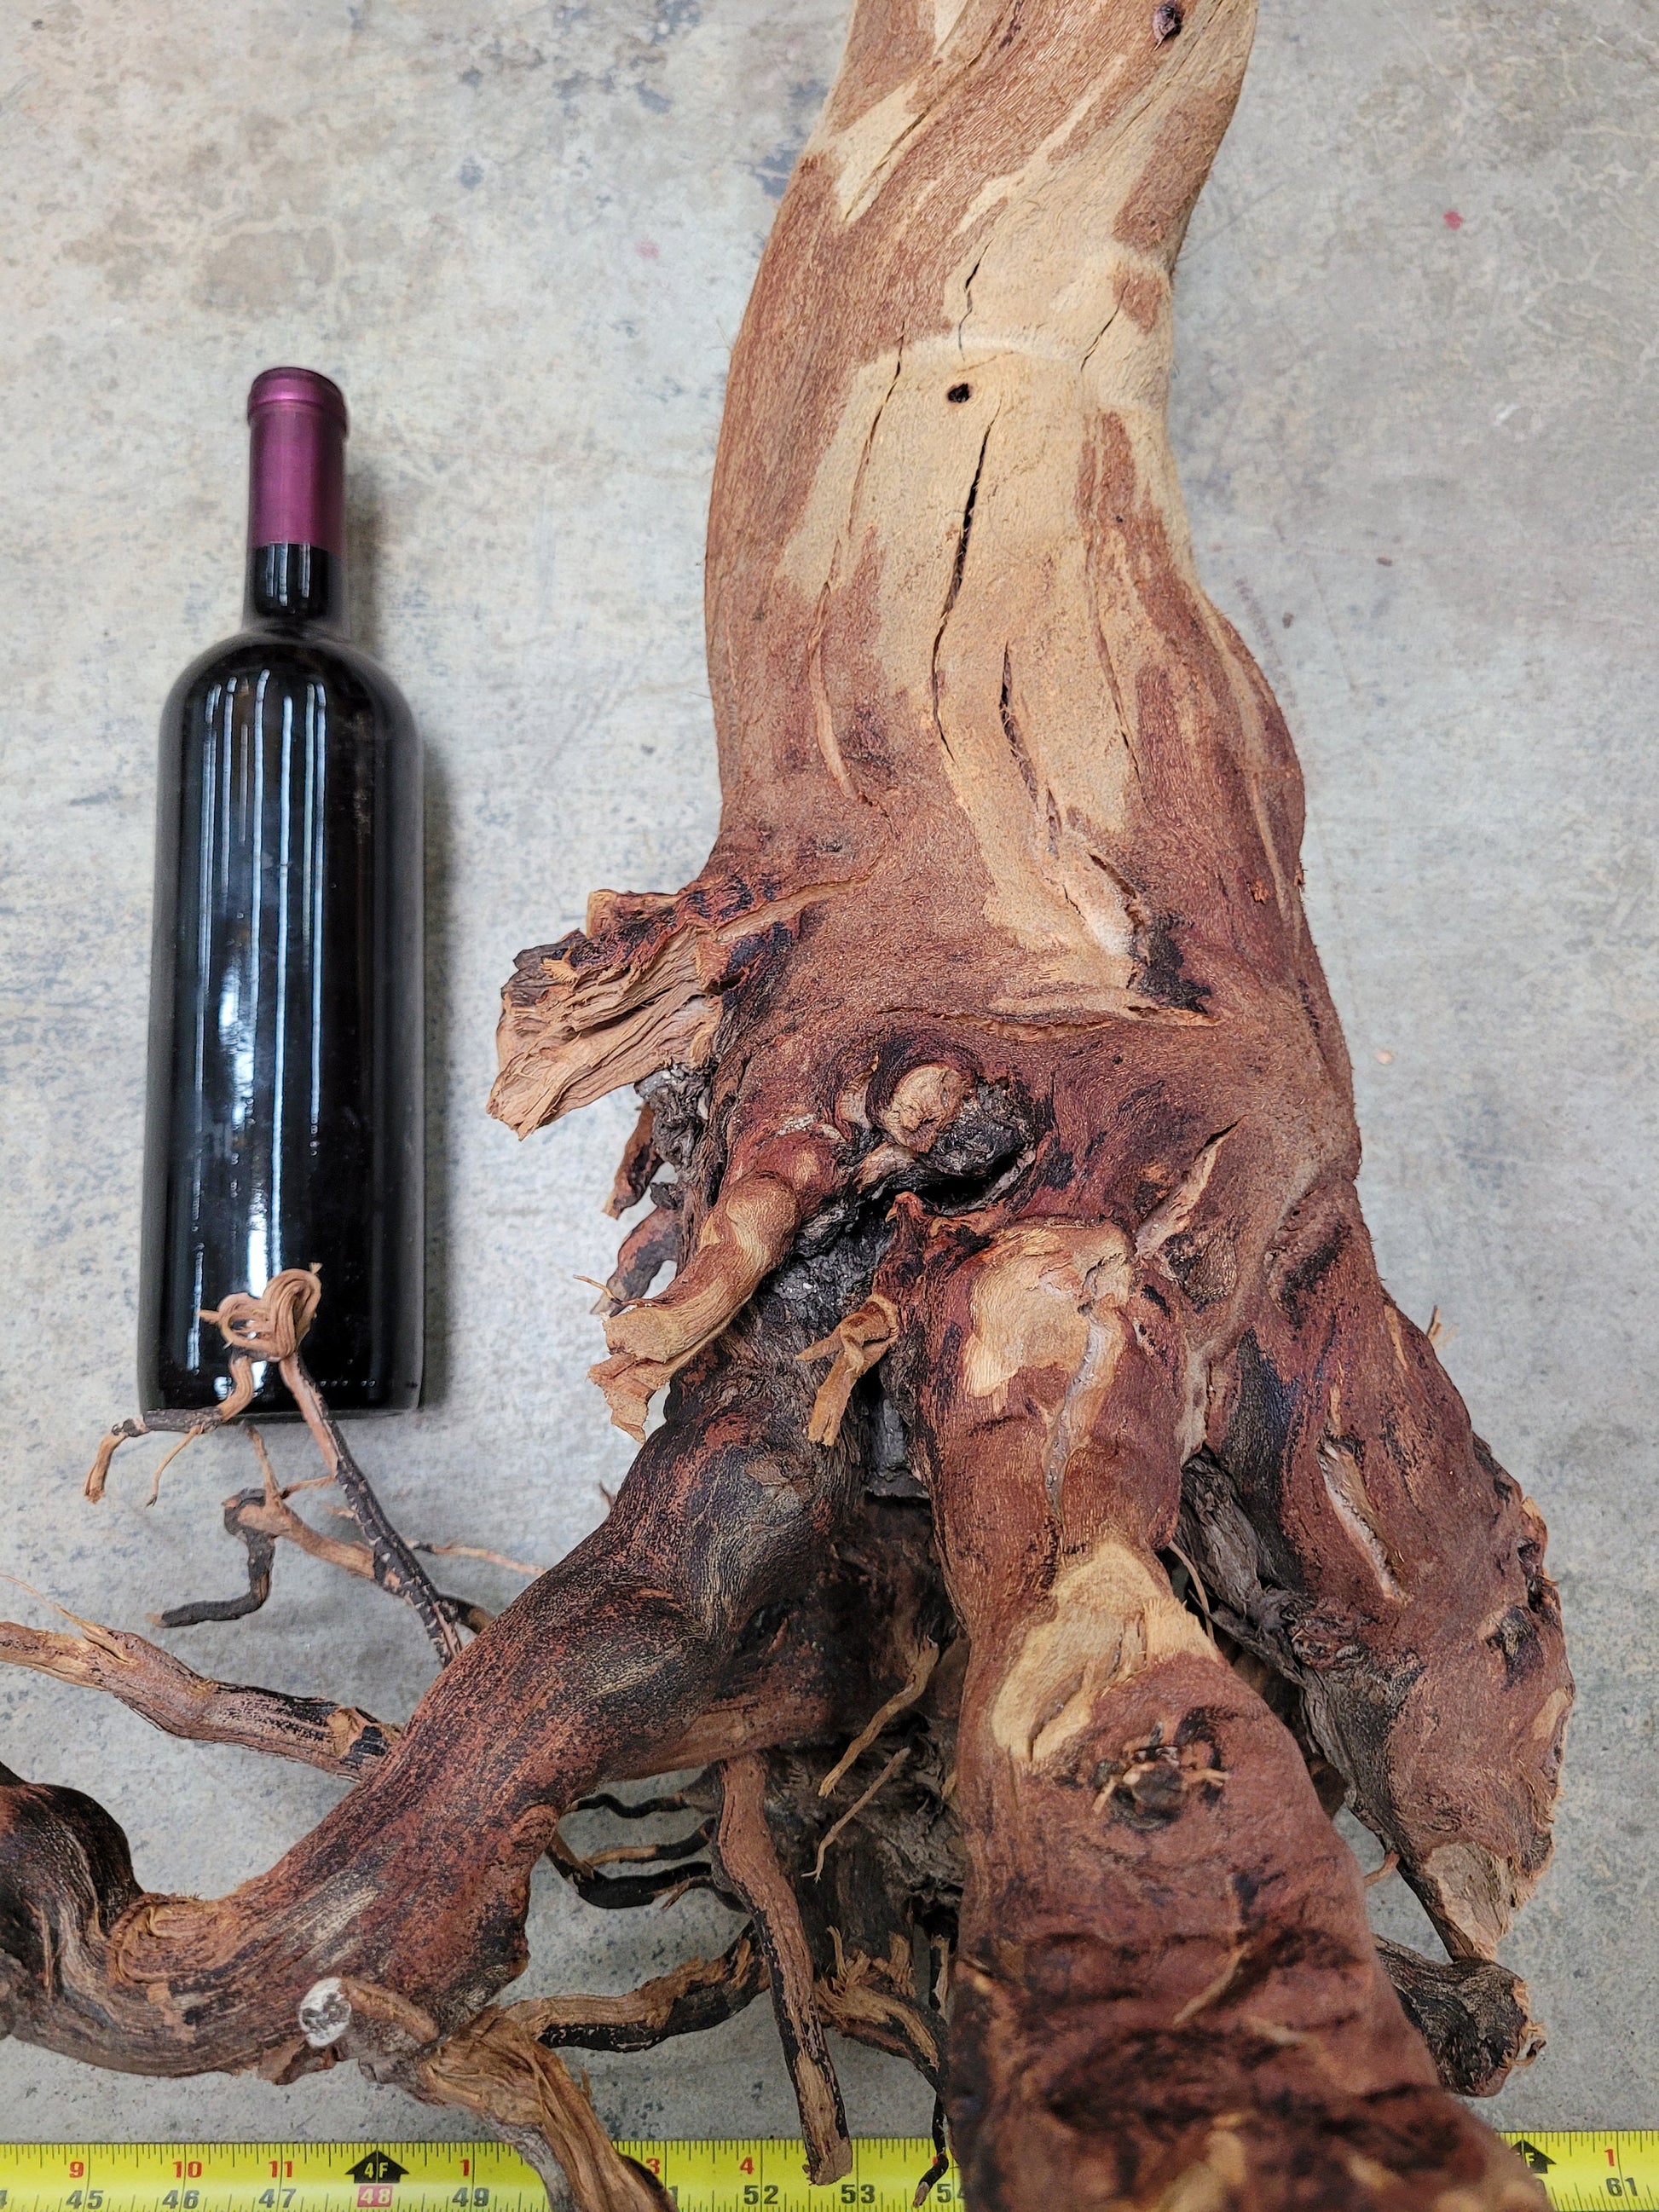 Zinfandel Old Grapevine Art From Turley Winery 100% Reclaimed + Ready to Ship!! 030822-7